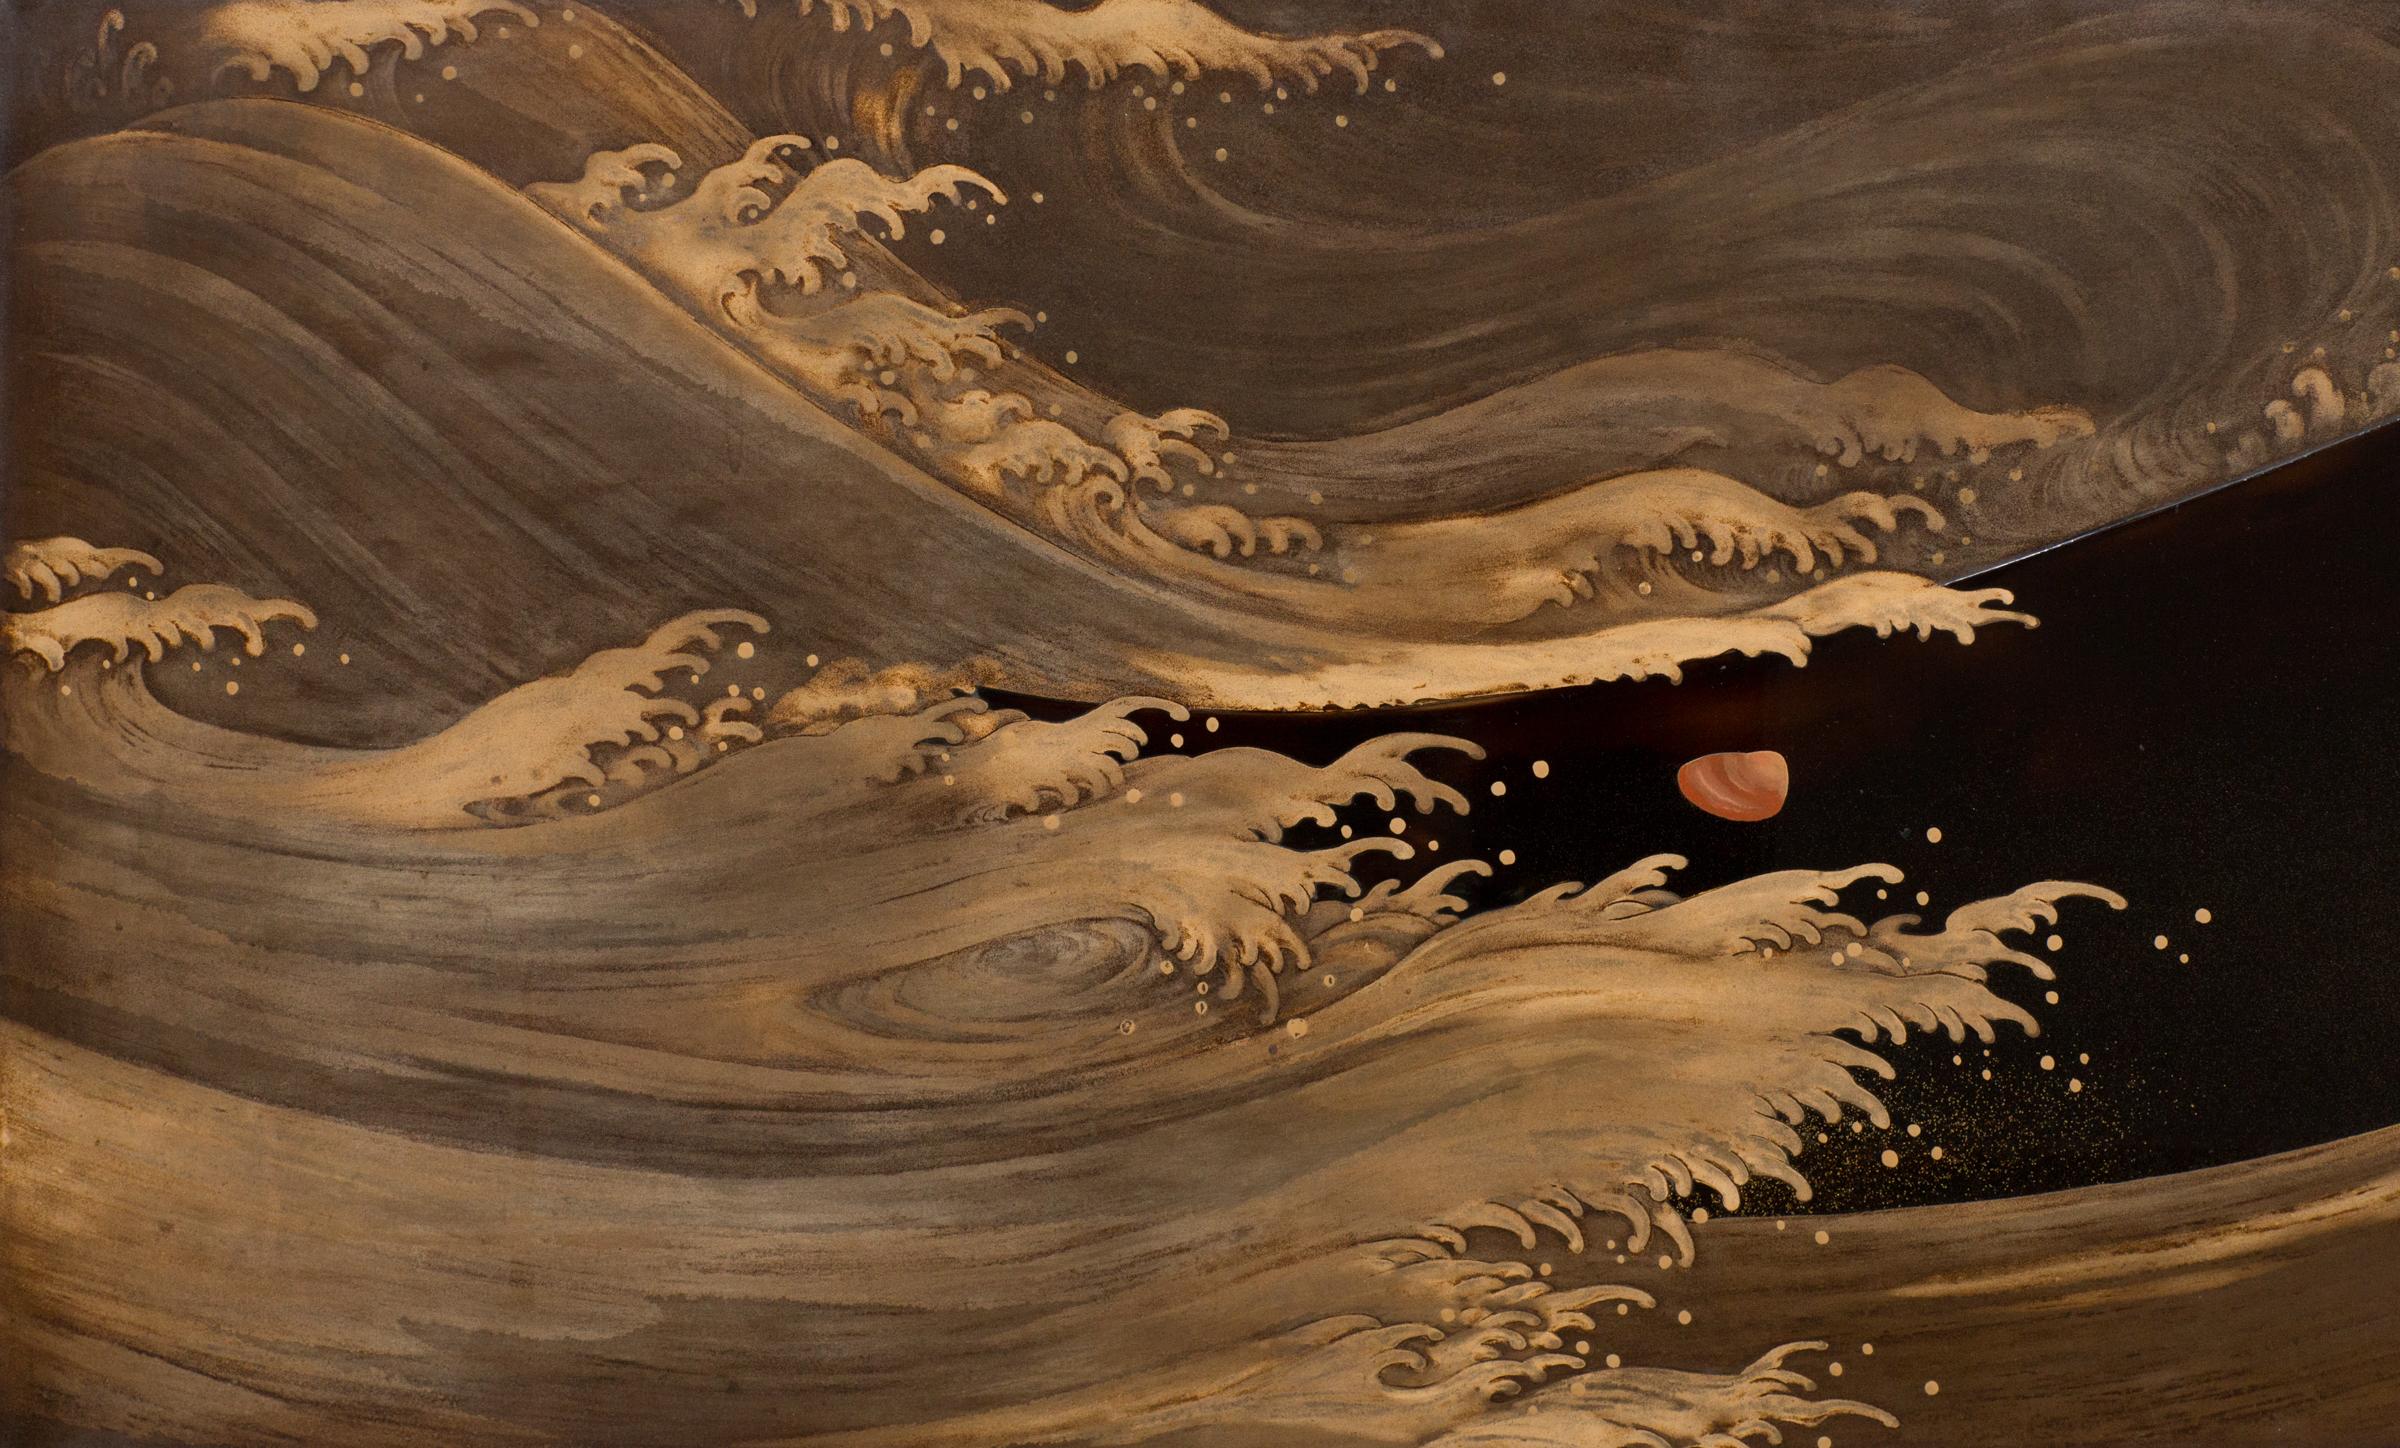 Japanese lacquer furosaki screen (tea screen) depicting waves crashing on a beach shore, leaving shells on the sand. Beach grasses and flowers on the right panel. Reverse is negoro lacquer with a border of ocean plants.